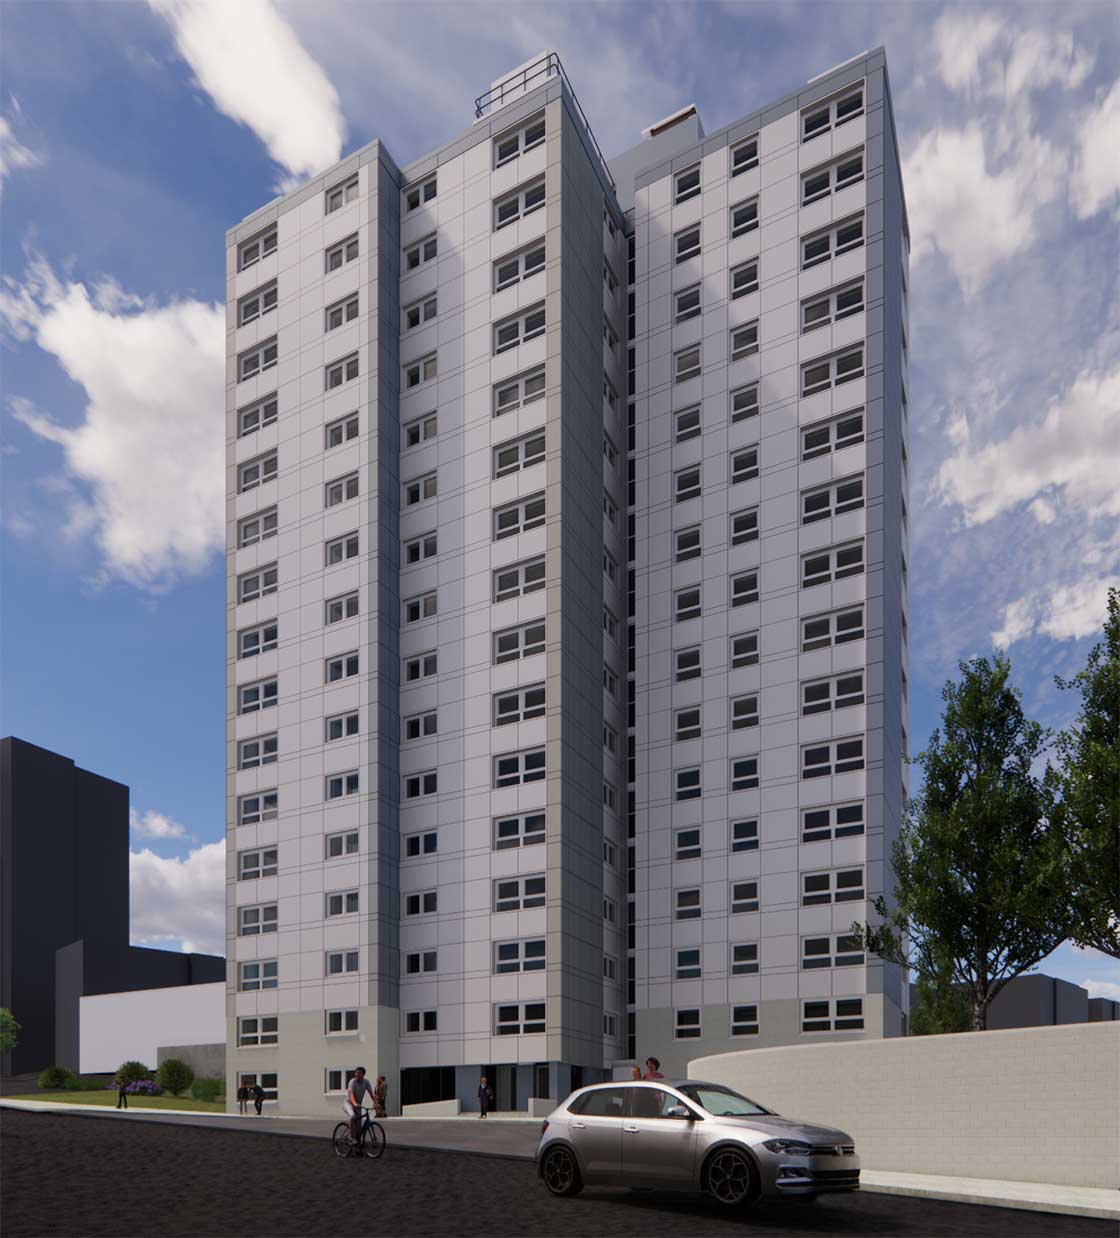 A rendering of the new façade of Prospecthill Court, a tower block being retrofitted to the AECB CarbonLite Retrofit Level 2 standard by River Clyde Homes